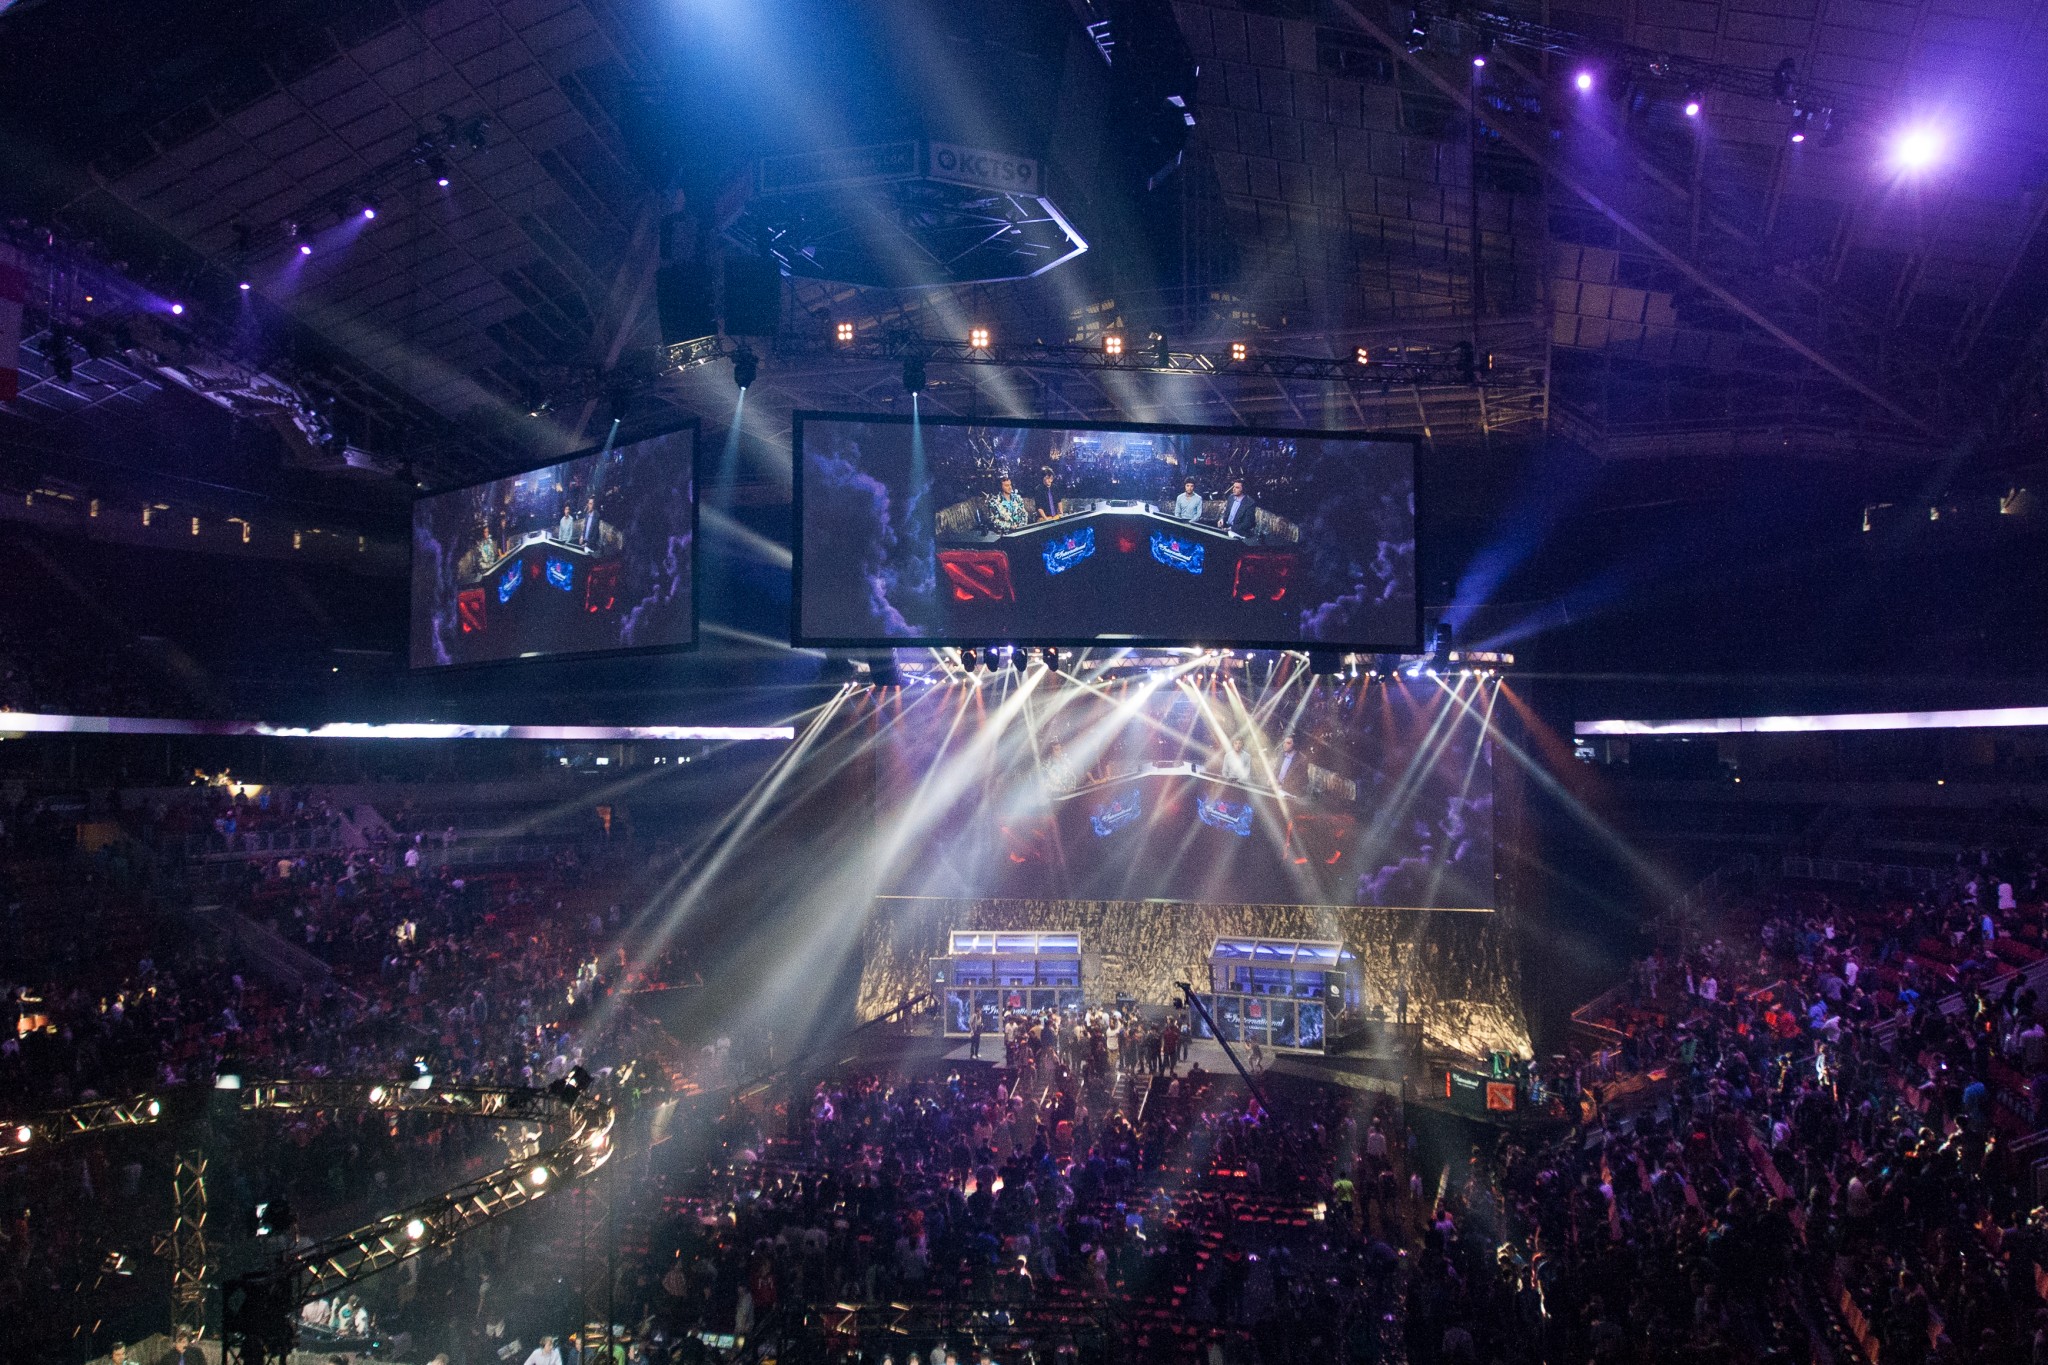 The Skoltech Esports Academy will train e-athletes to take home the gold in major international tournaments. Photo credit: Jakob Wells/Wikimedia Commons